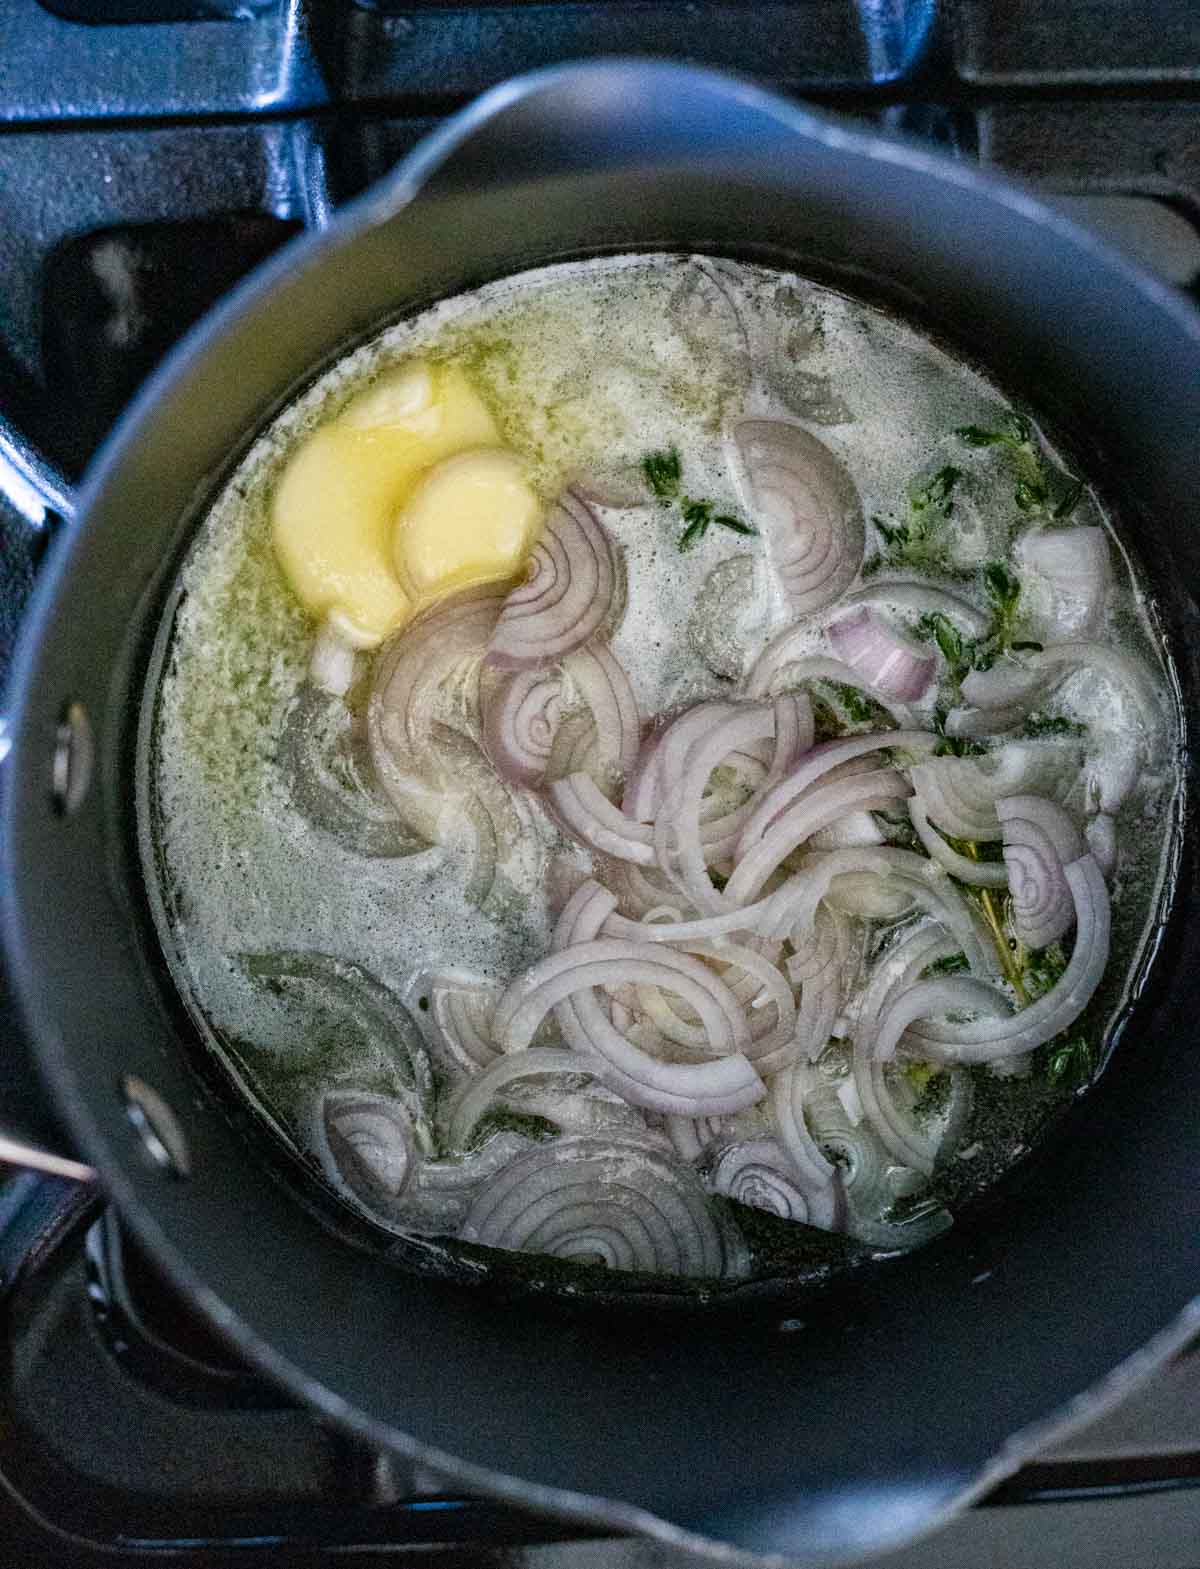 Grapefruit and shallot sauce cooking in a pot on the stovetop.